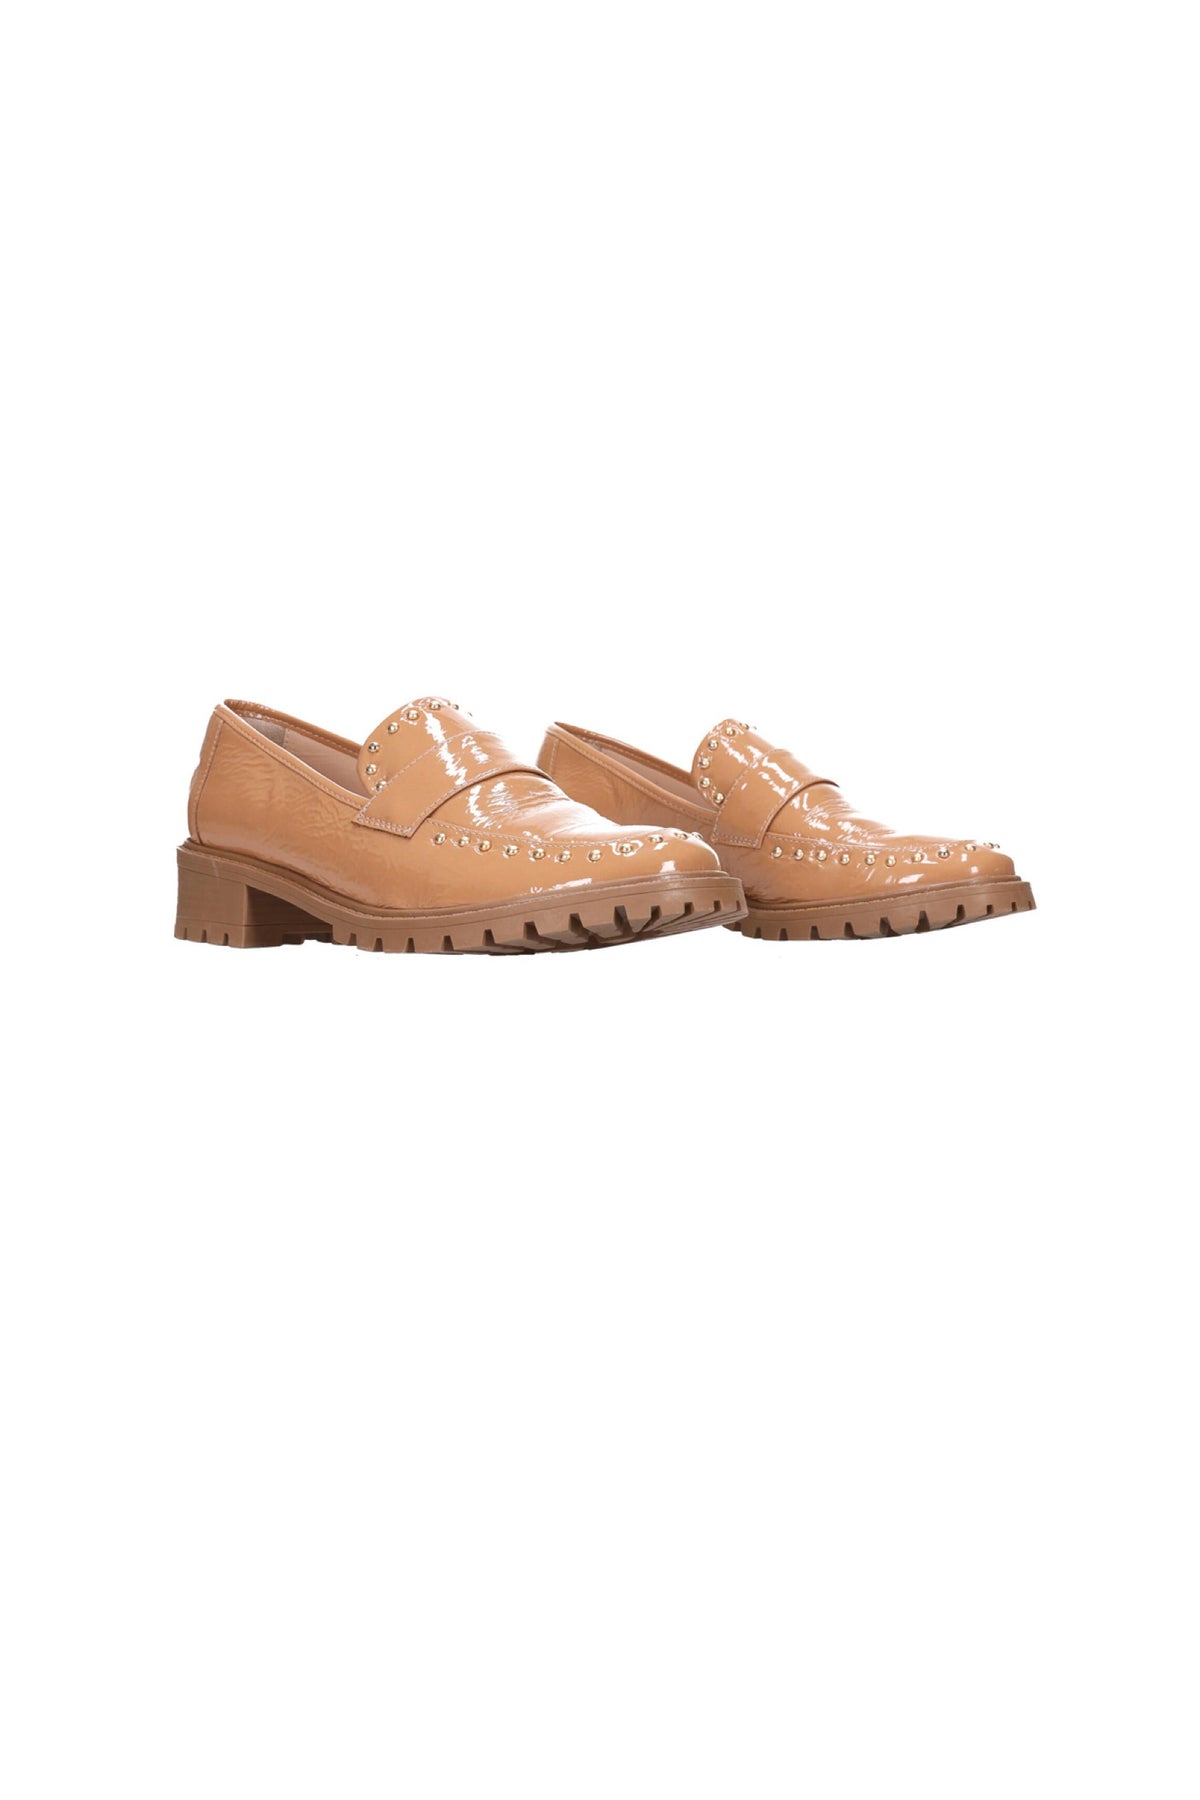 Brynlee Loafer Tan Patent